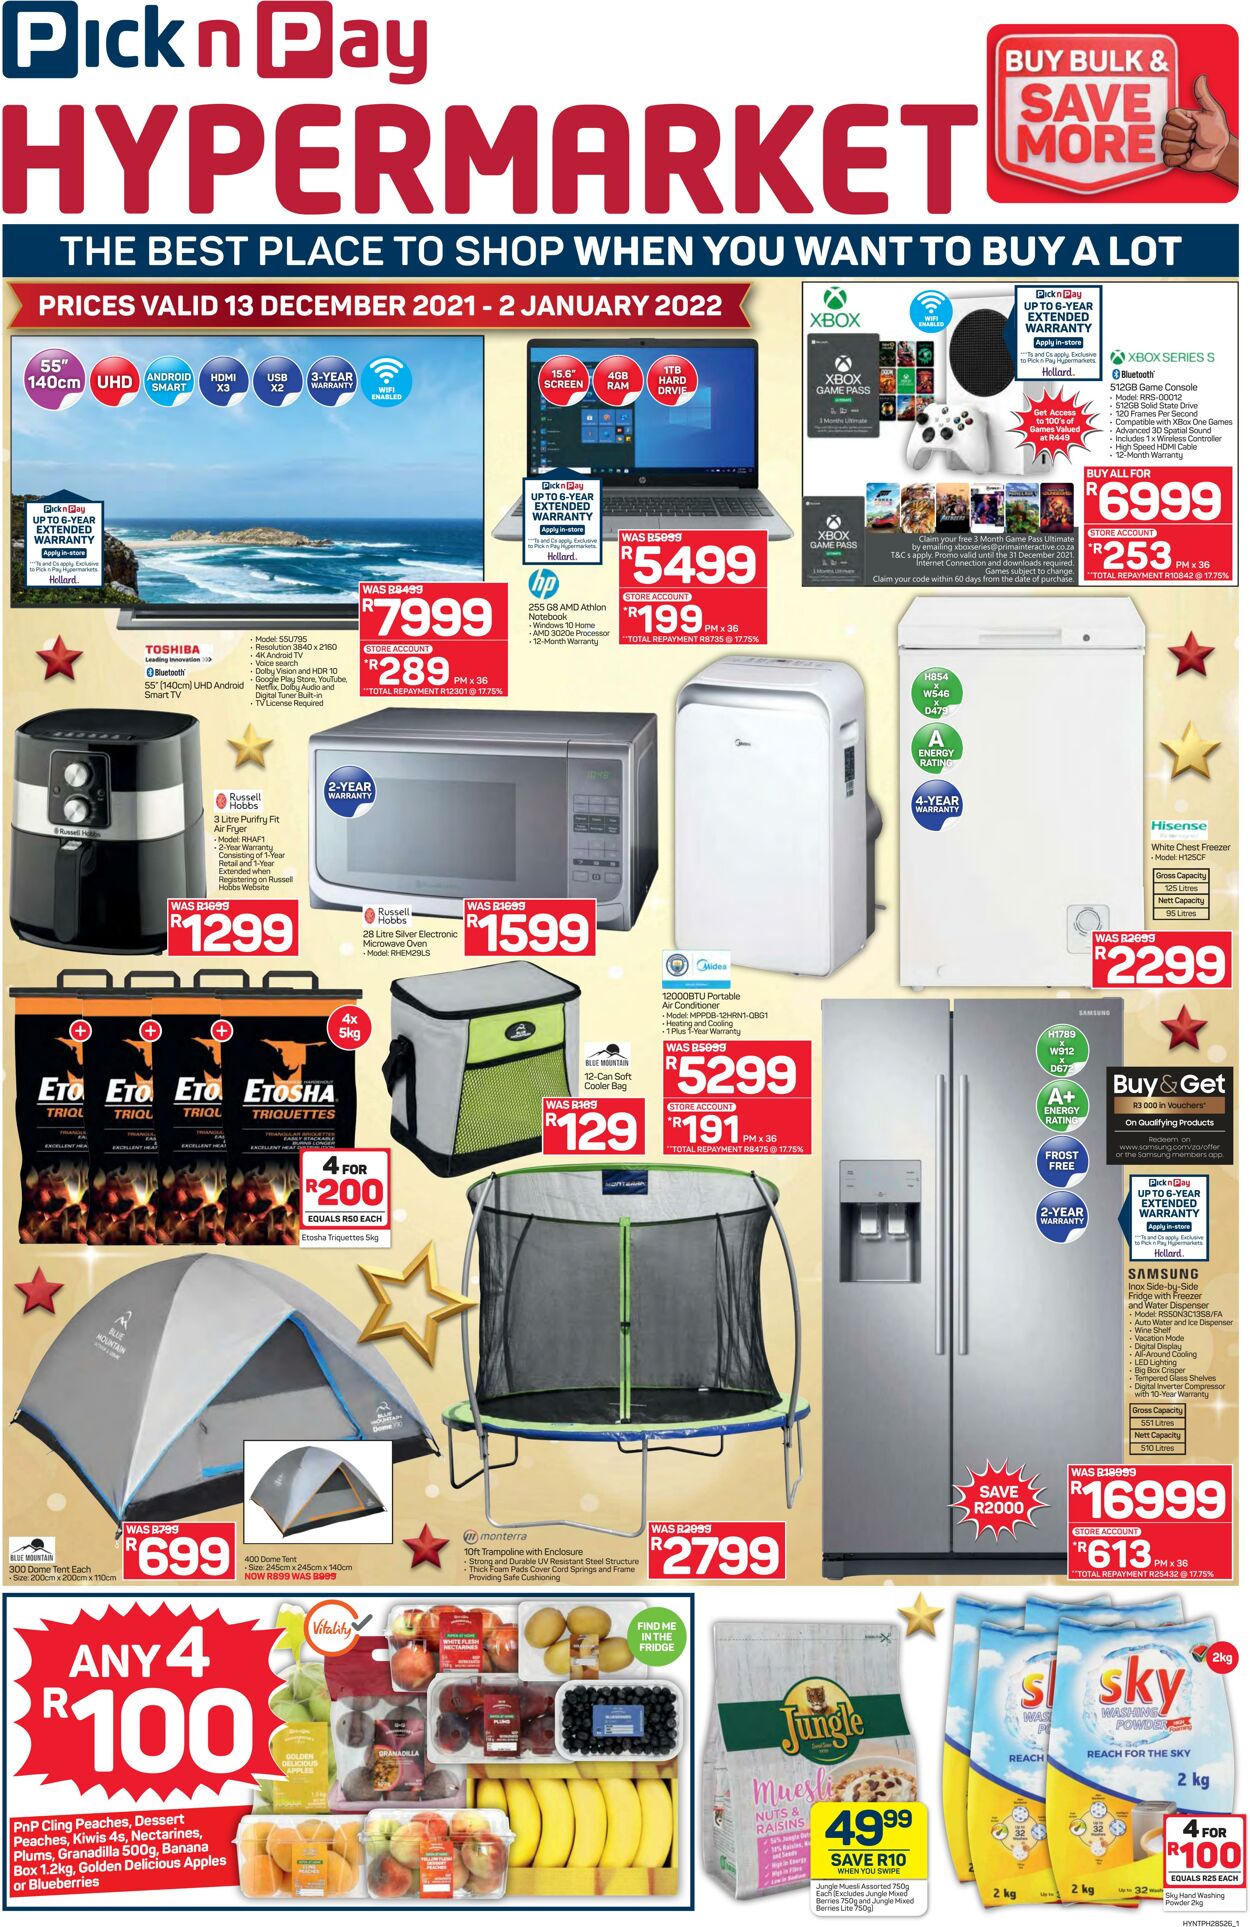 Special Pick n Pay 13.12.2021-12.01.2022